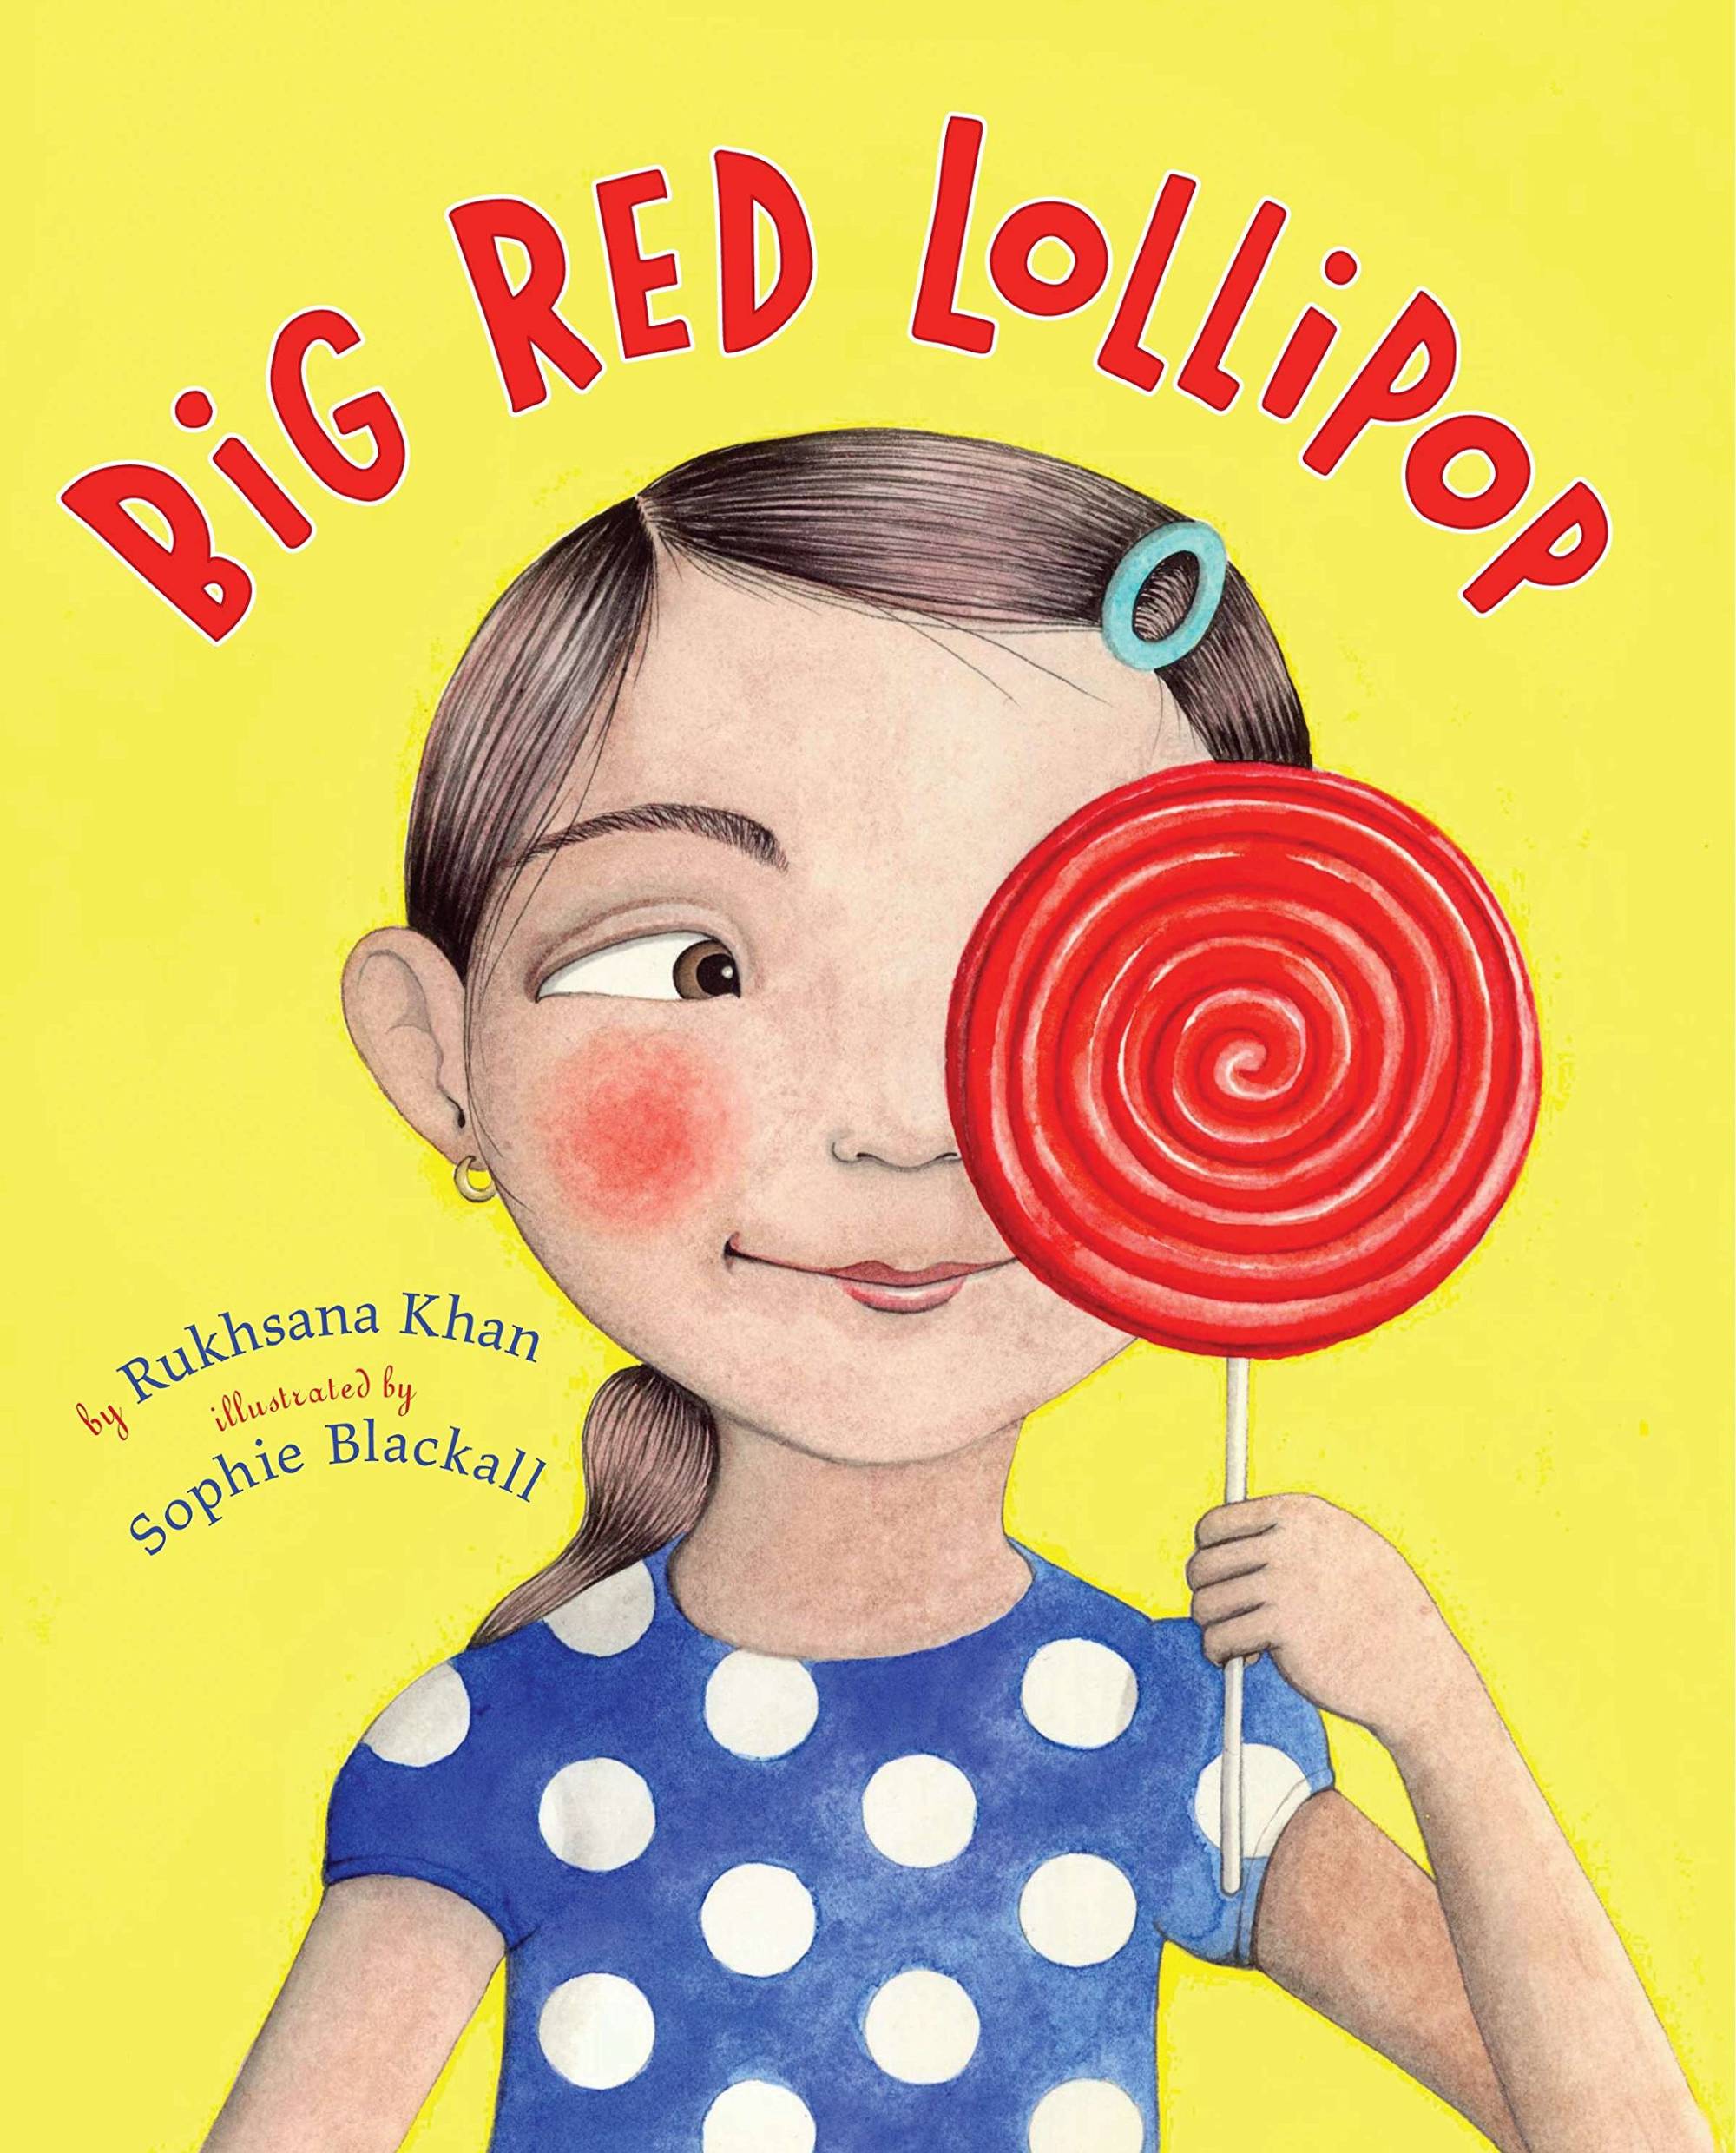 Illustrated book cover featuring a child holding a big red lollipop up to their face